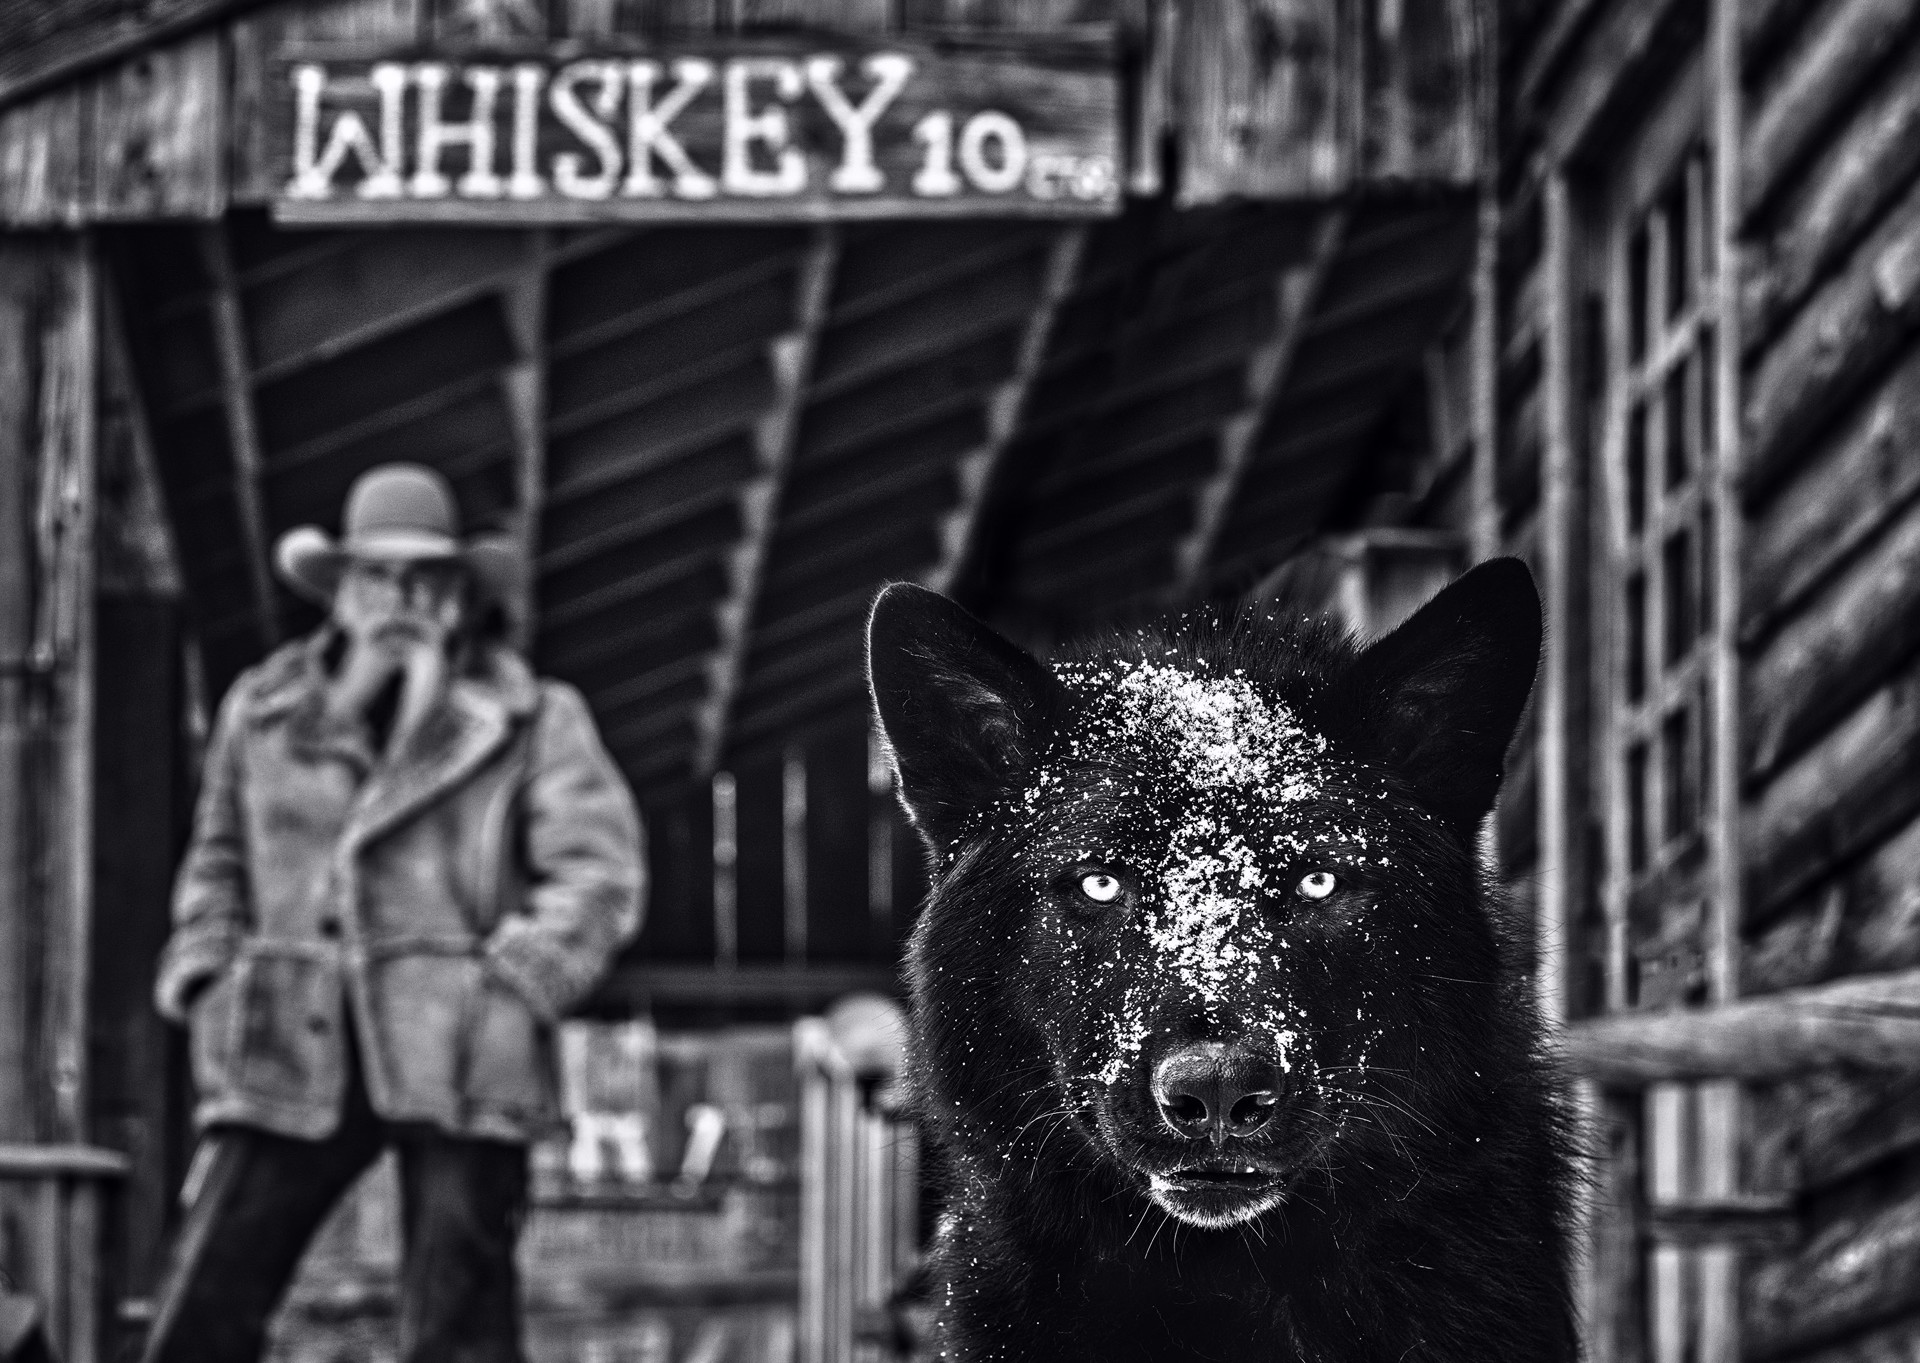 It was the Whiskey Talking by David Yarrow